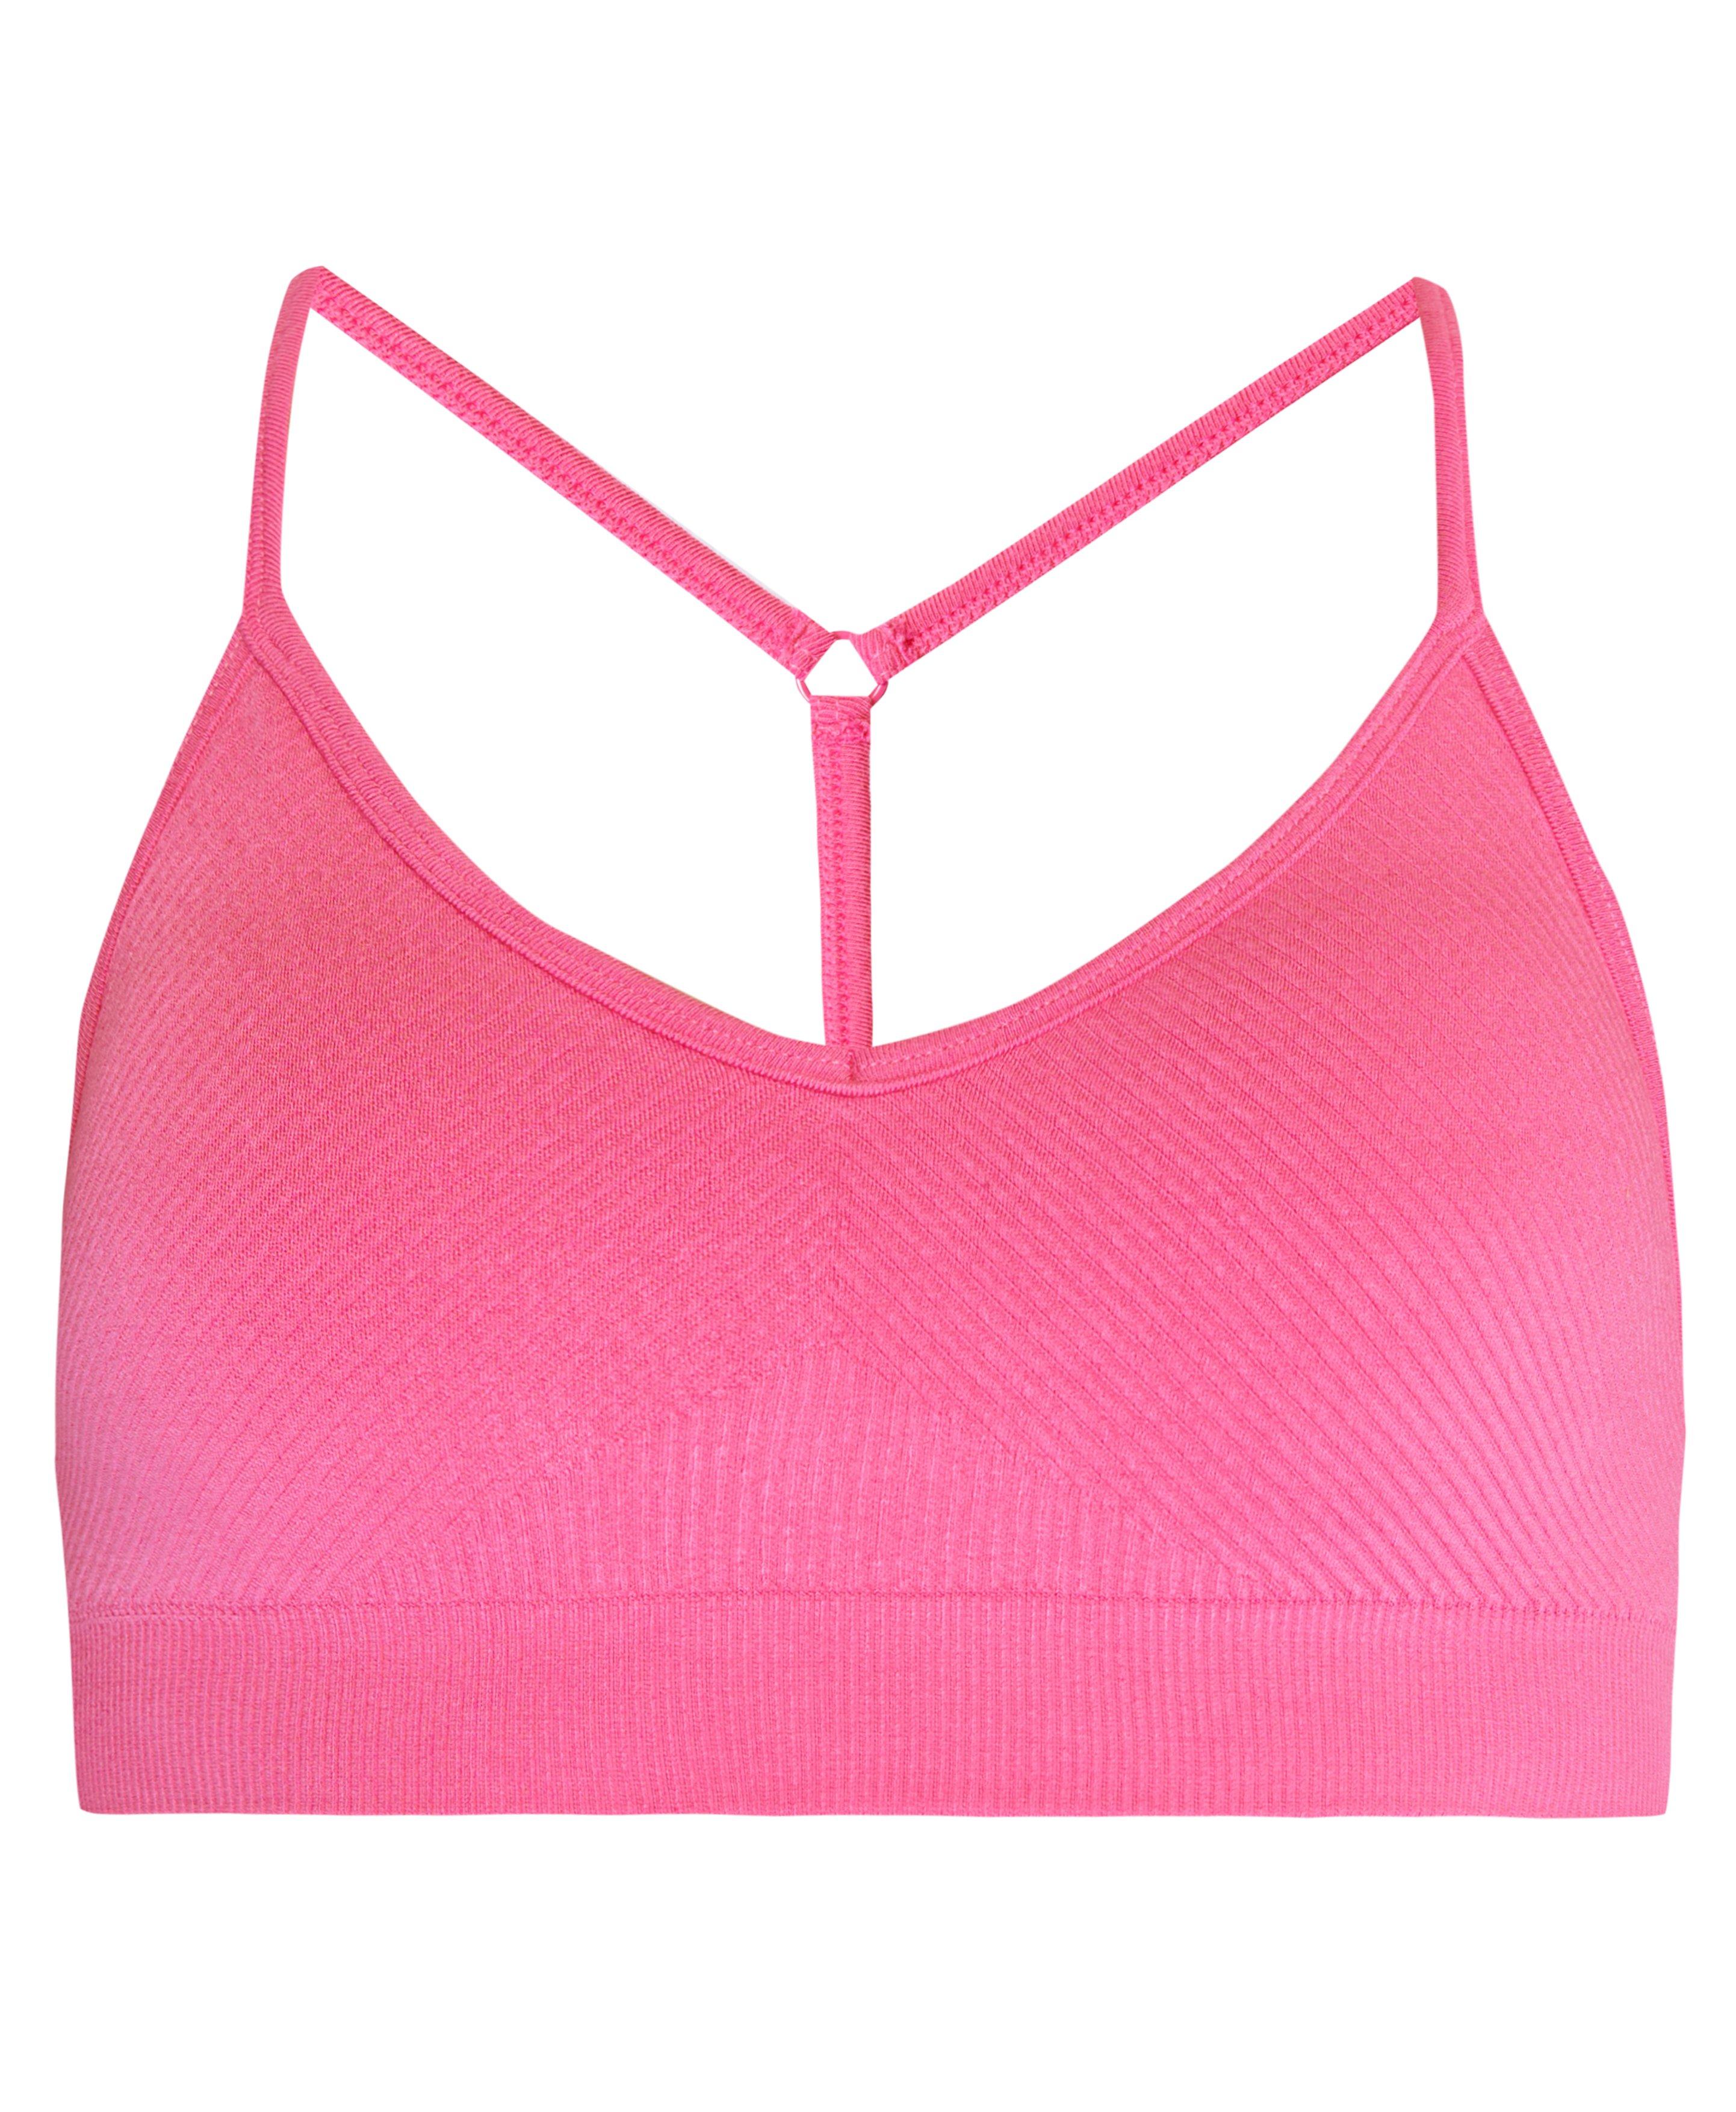 Beyond Yoga Speckled Sports Bra By in Pink Size XS